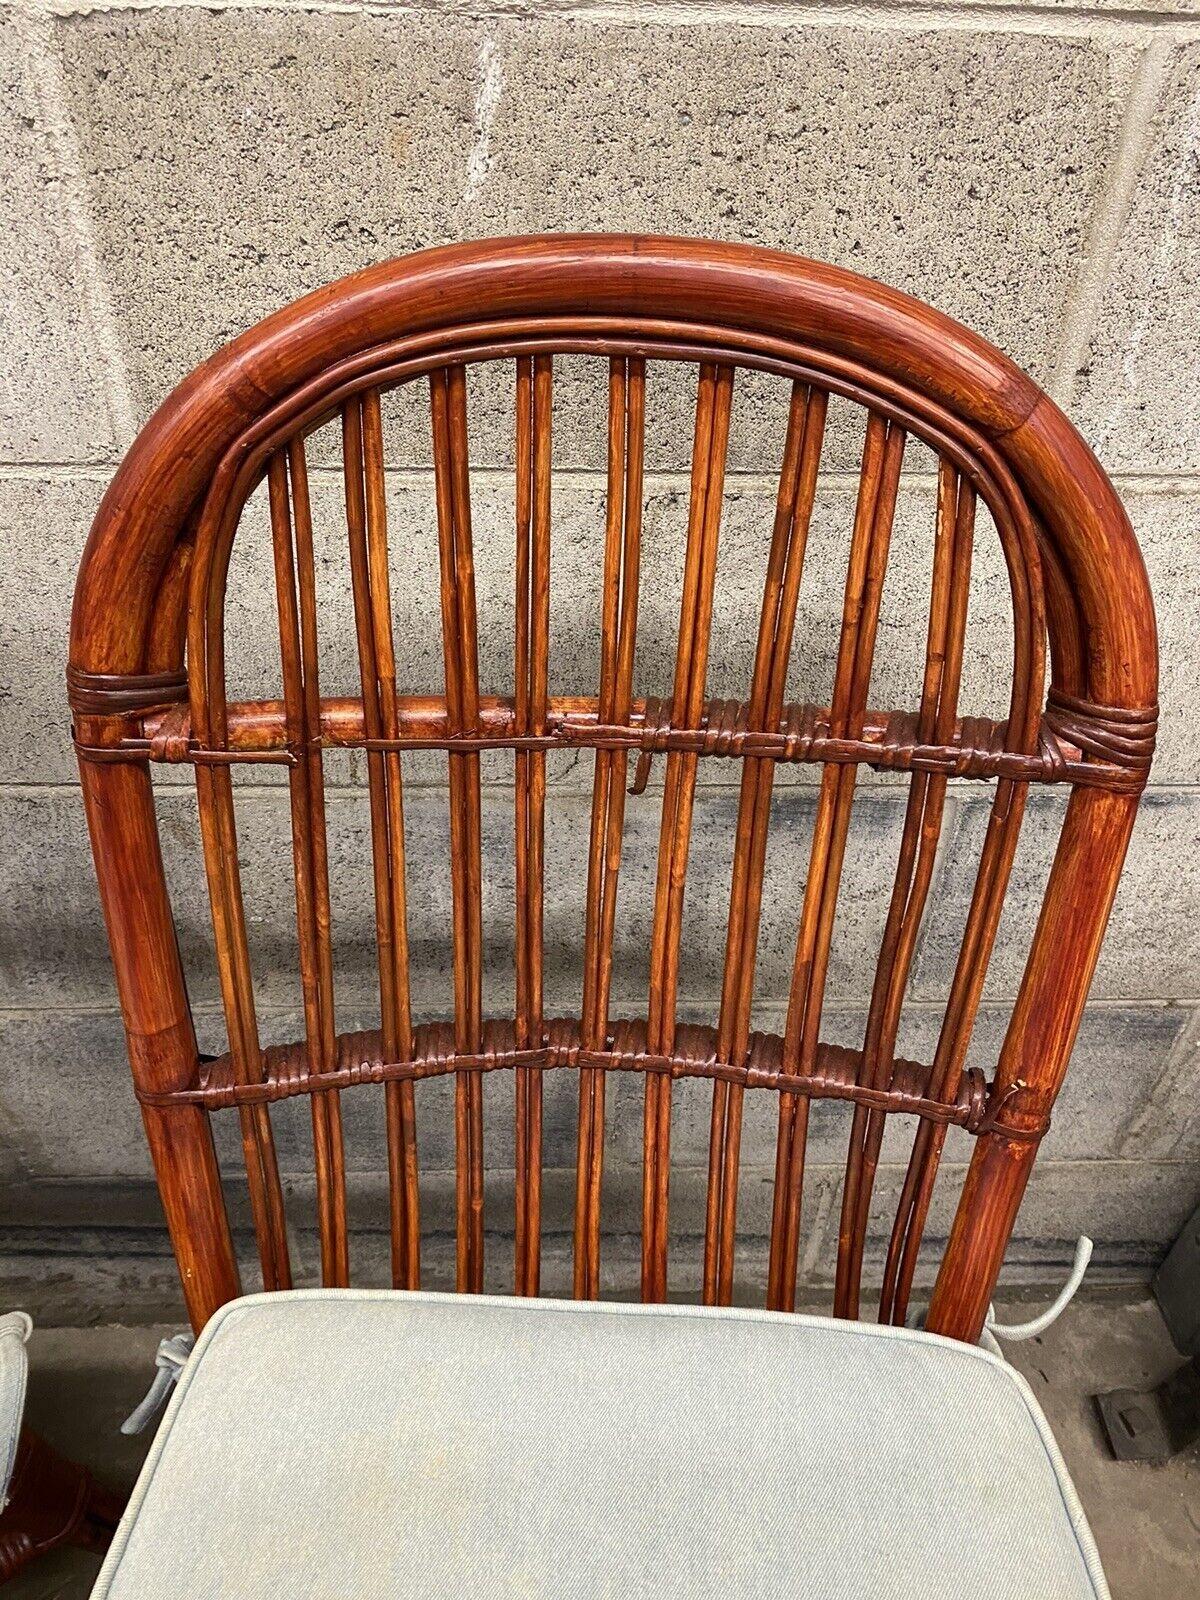 Vintage Hollywood Regency Palm Beach Bamboo Dining Side Chairs - Set of 4 In Good Condition For Sale In Philadelphia, PA